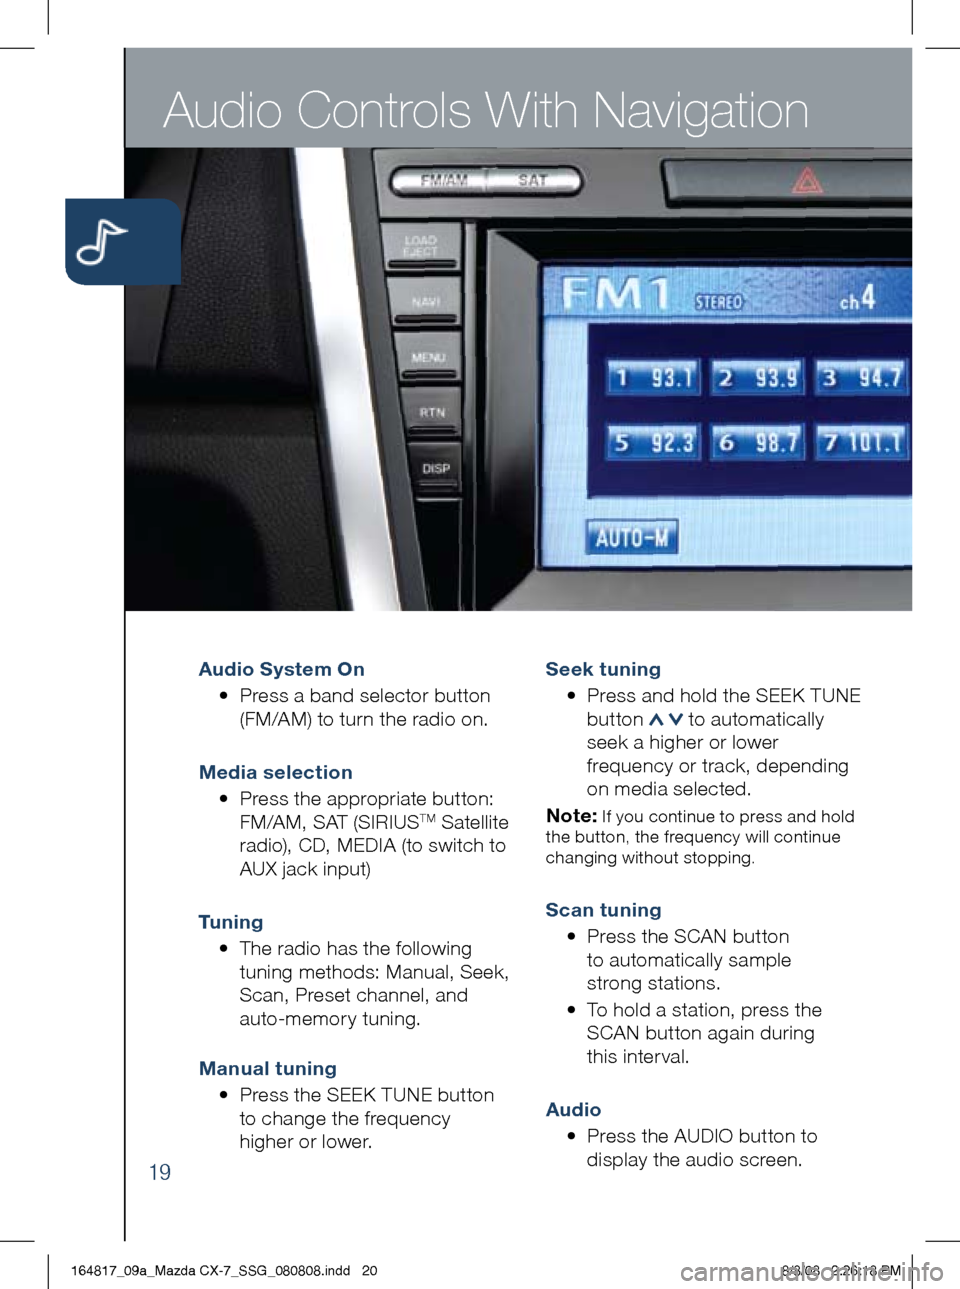 MAZDA MODEL CX-7 2009  Smart Start Guide (in English) Audio Controls With Navigation
19
Audio System On  
	 •		 Press 	a 	band 	selector 	button	
(FM/AM)	to	turn	the	radio	on.
m edia selection 
	 •	 	
Press	the	appropriate	button: 	
FM/AM,	SAT	(SIRIU